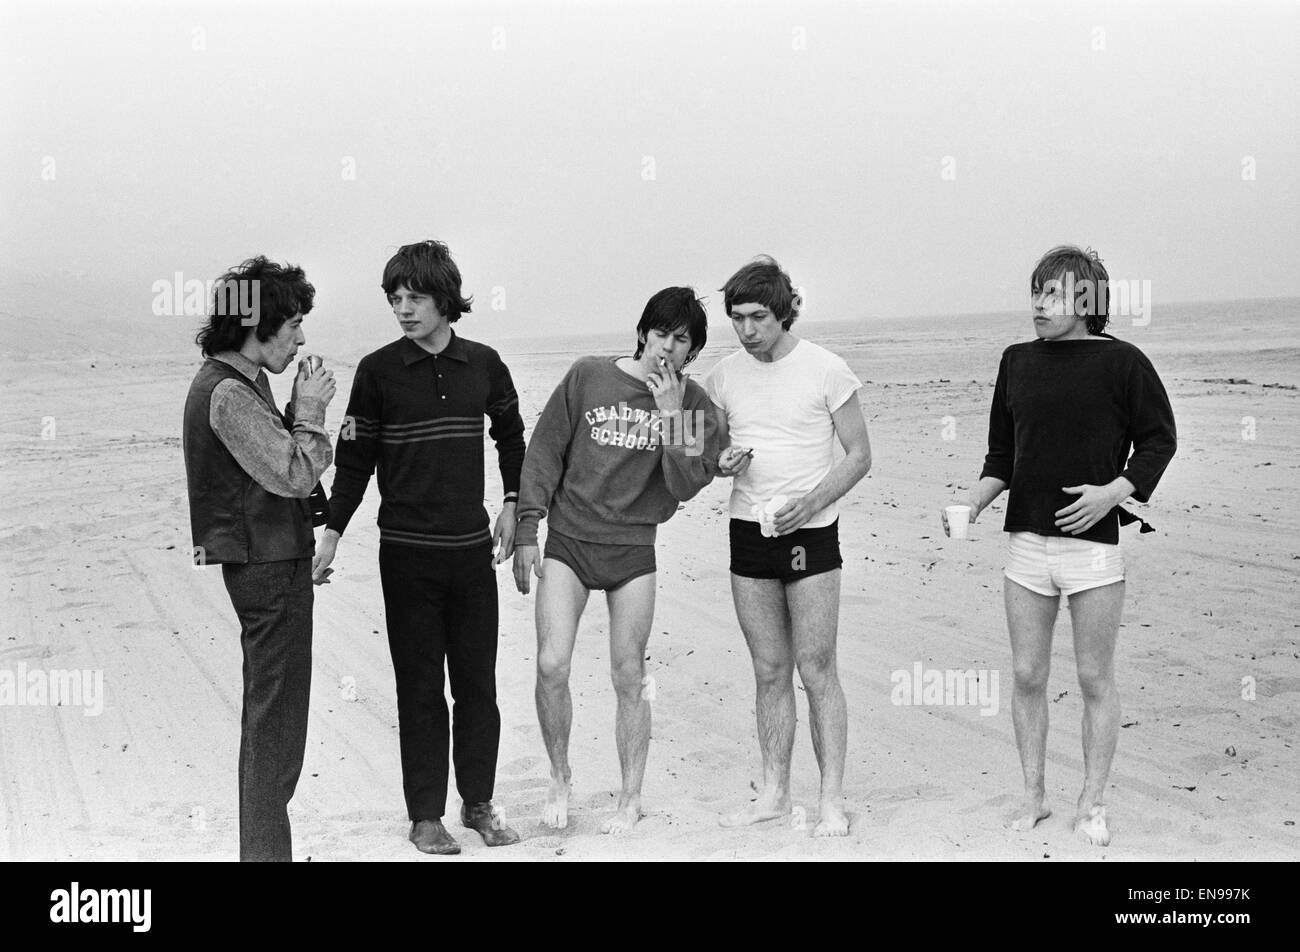 The Rolling Stones. Bill Wyman, Mick Jagger, Keith Richards, Charlie Watts and Brian Jones seen here posing on Malibu beach. According to the photographers ' The boys had some hamburgers and played football and were happy to be beside the sea' However it Stock Photo